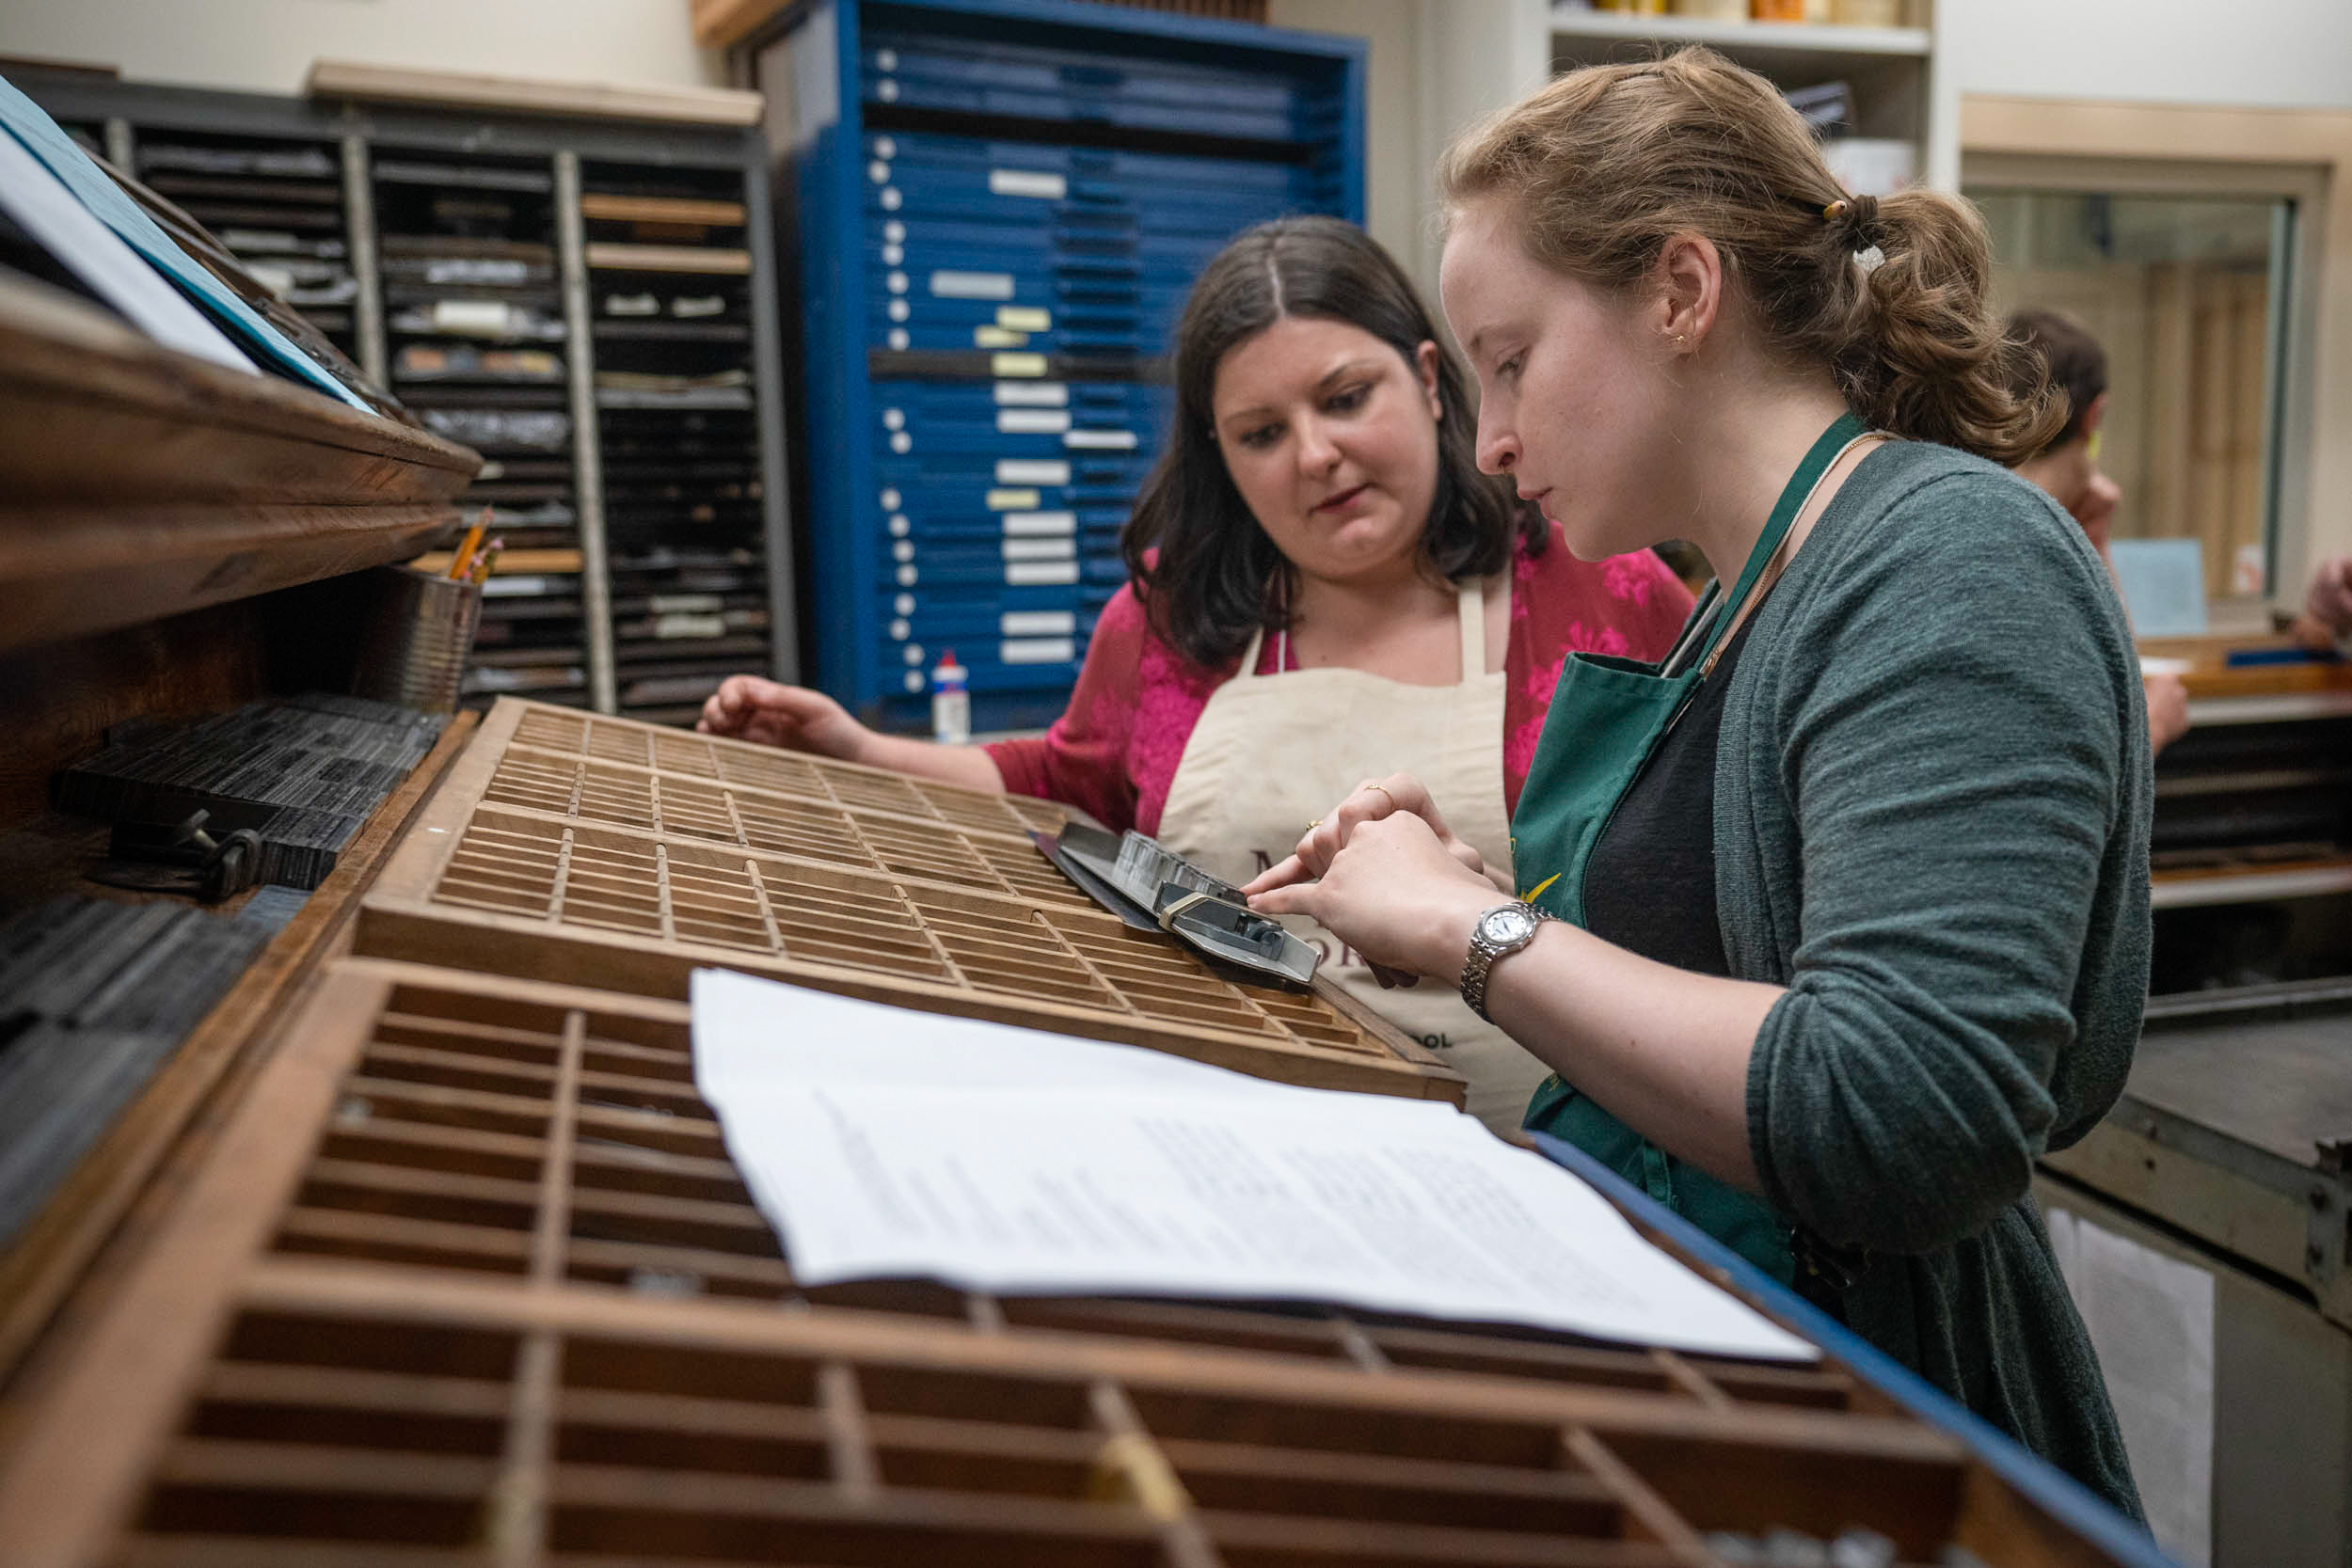 Suzanne Glémot shows Amanda Rogus how the typesetting pieces fit together